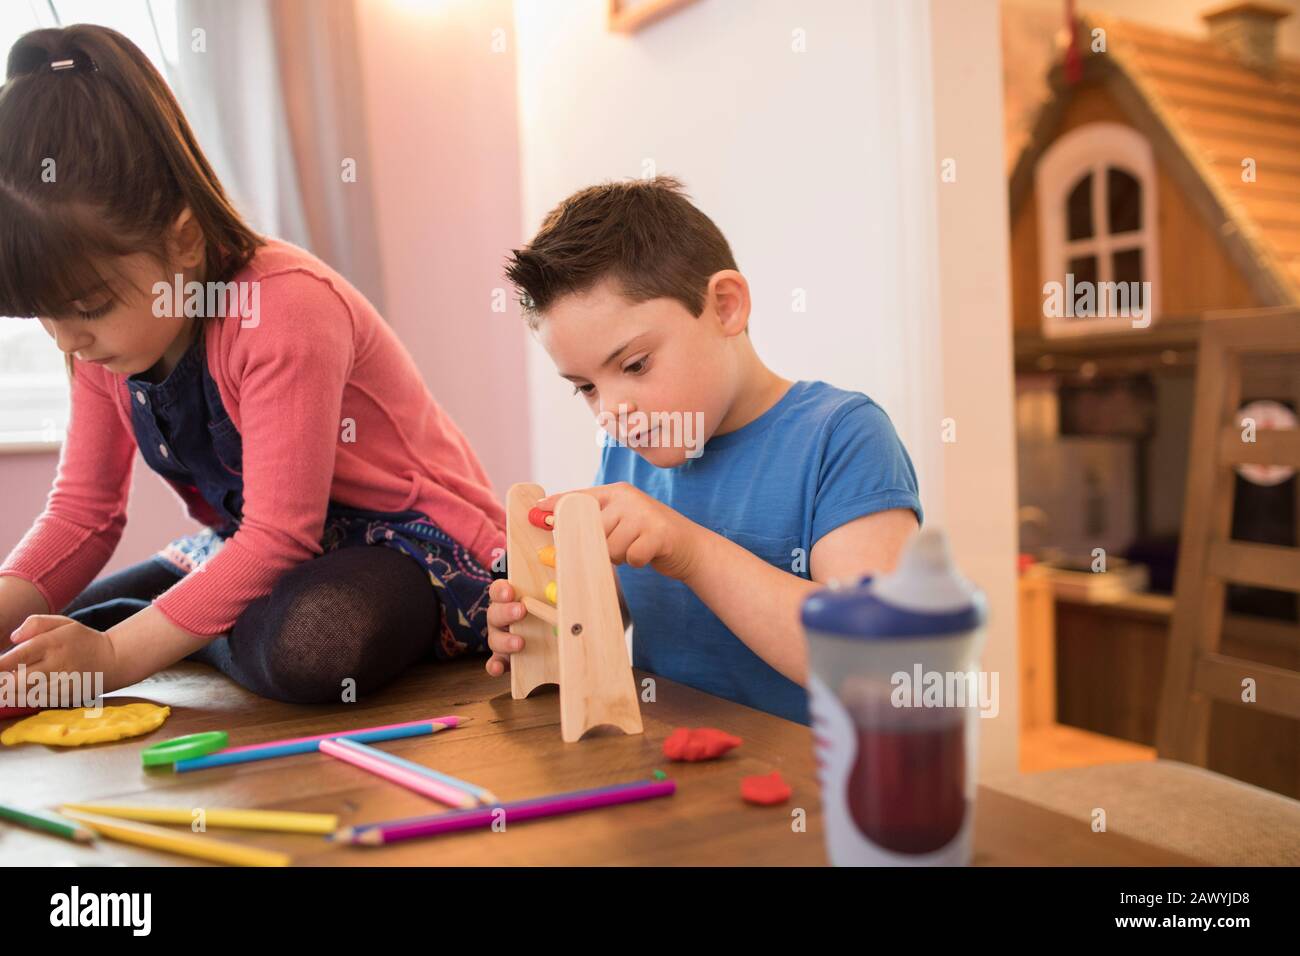 Focused boy with Down Syndrome playing with toy at table Stock Photo